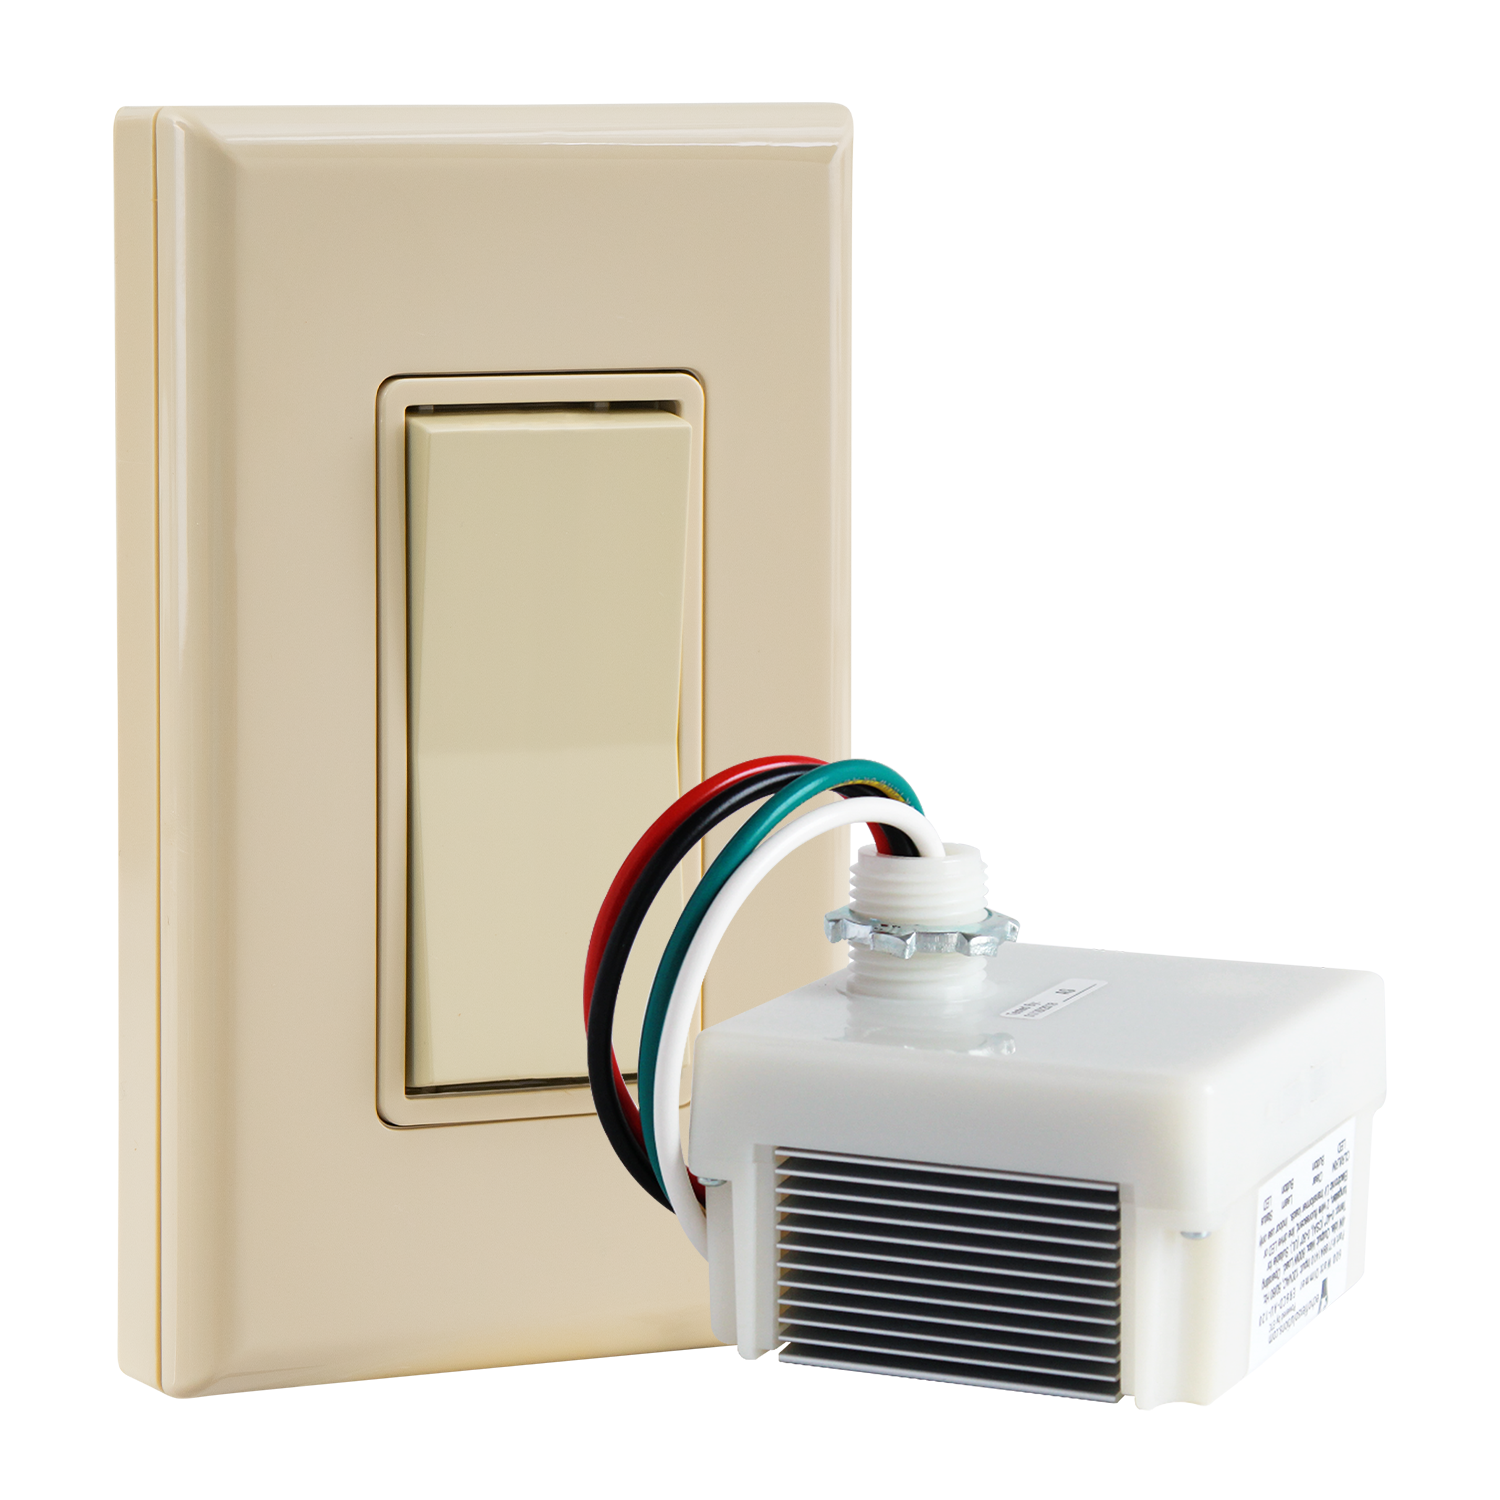 BASIC DIMMER KIT: 1 DIMMING RECEIVER, 1 SWITCH